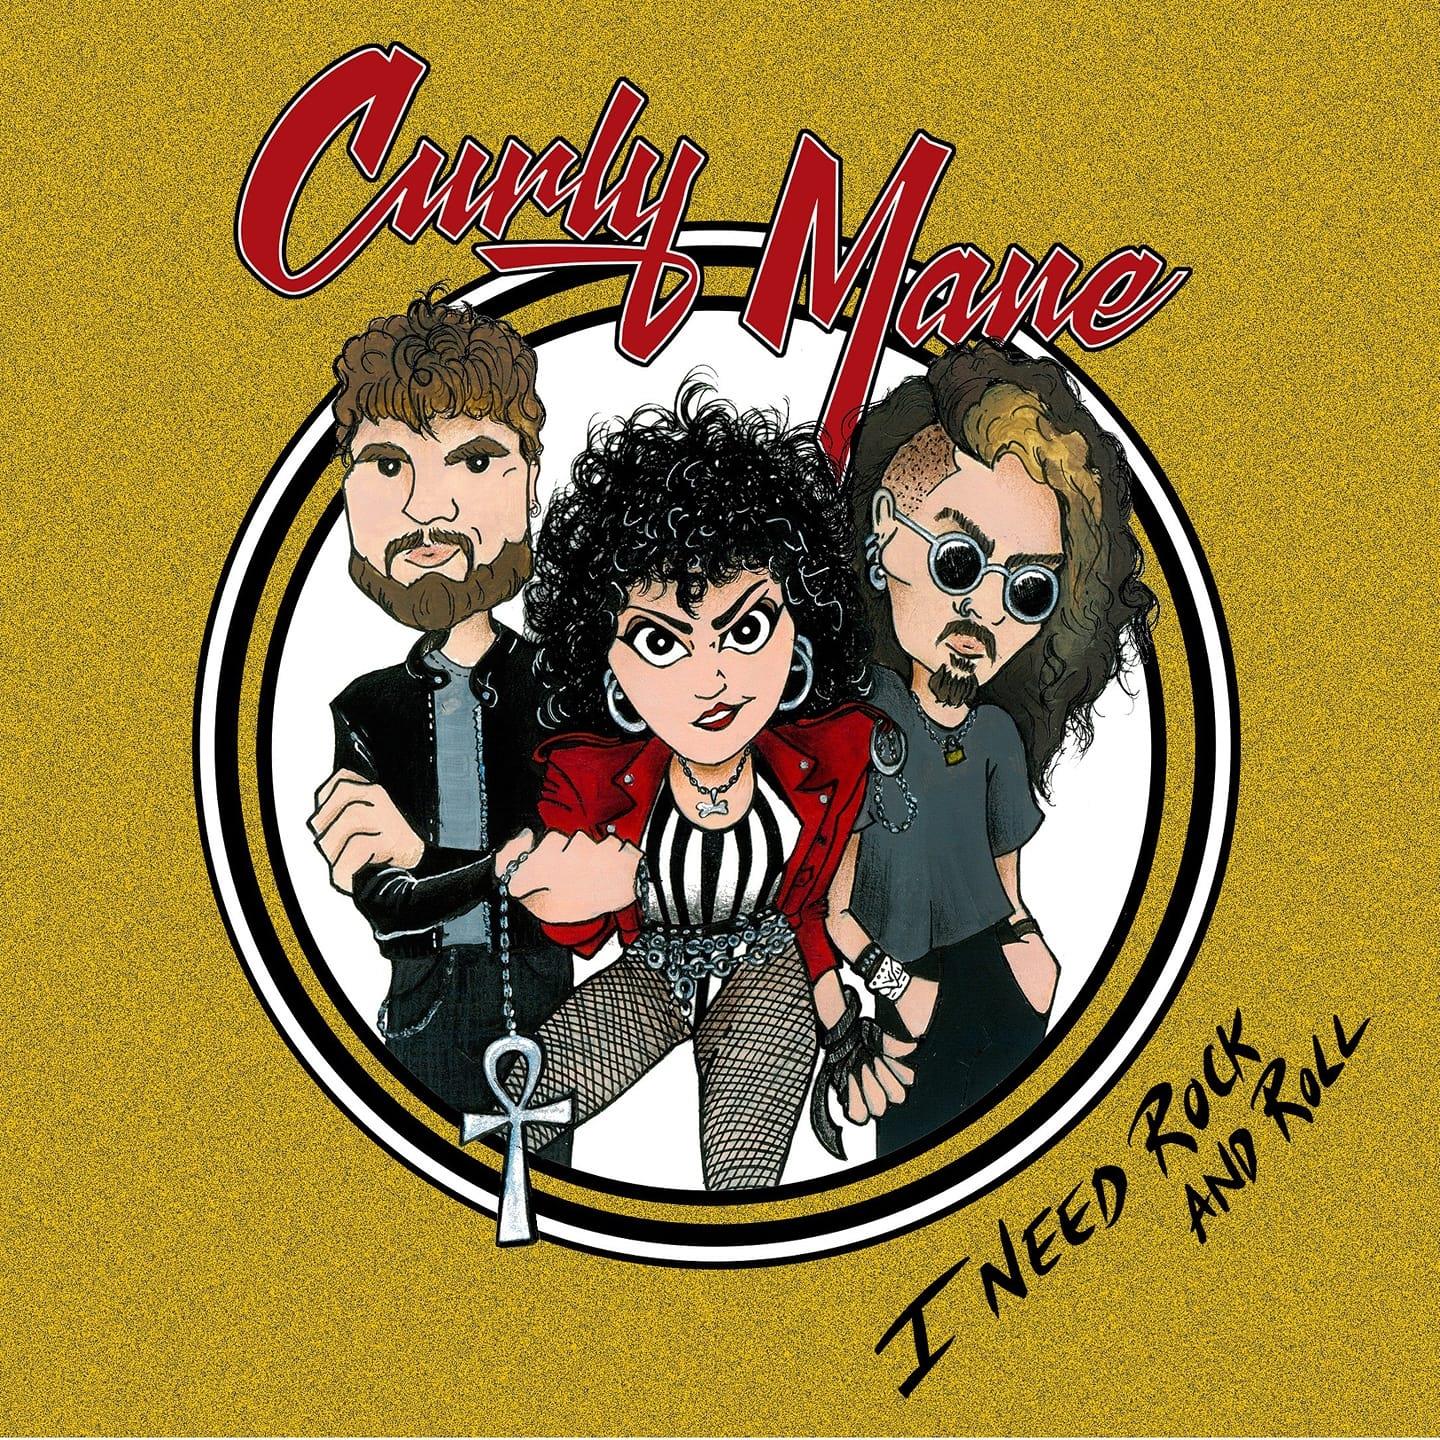 Reseña: Curly Mane “I Need Rock And Roll”